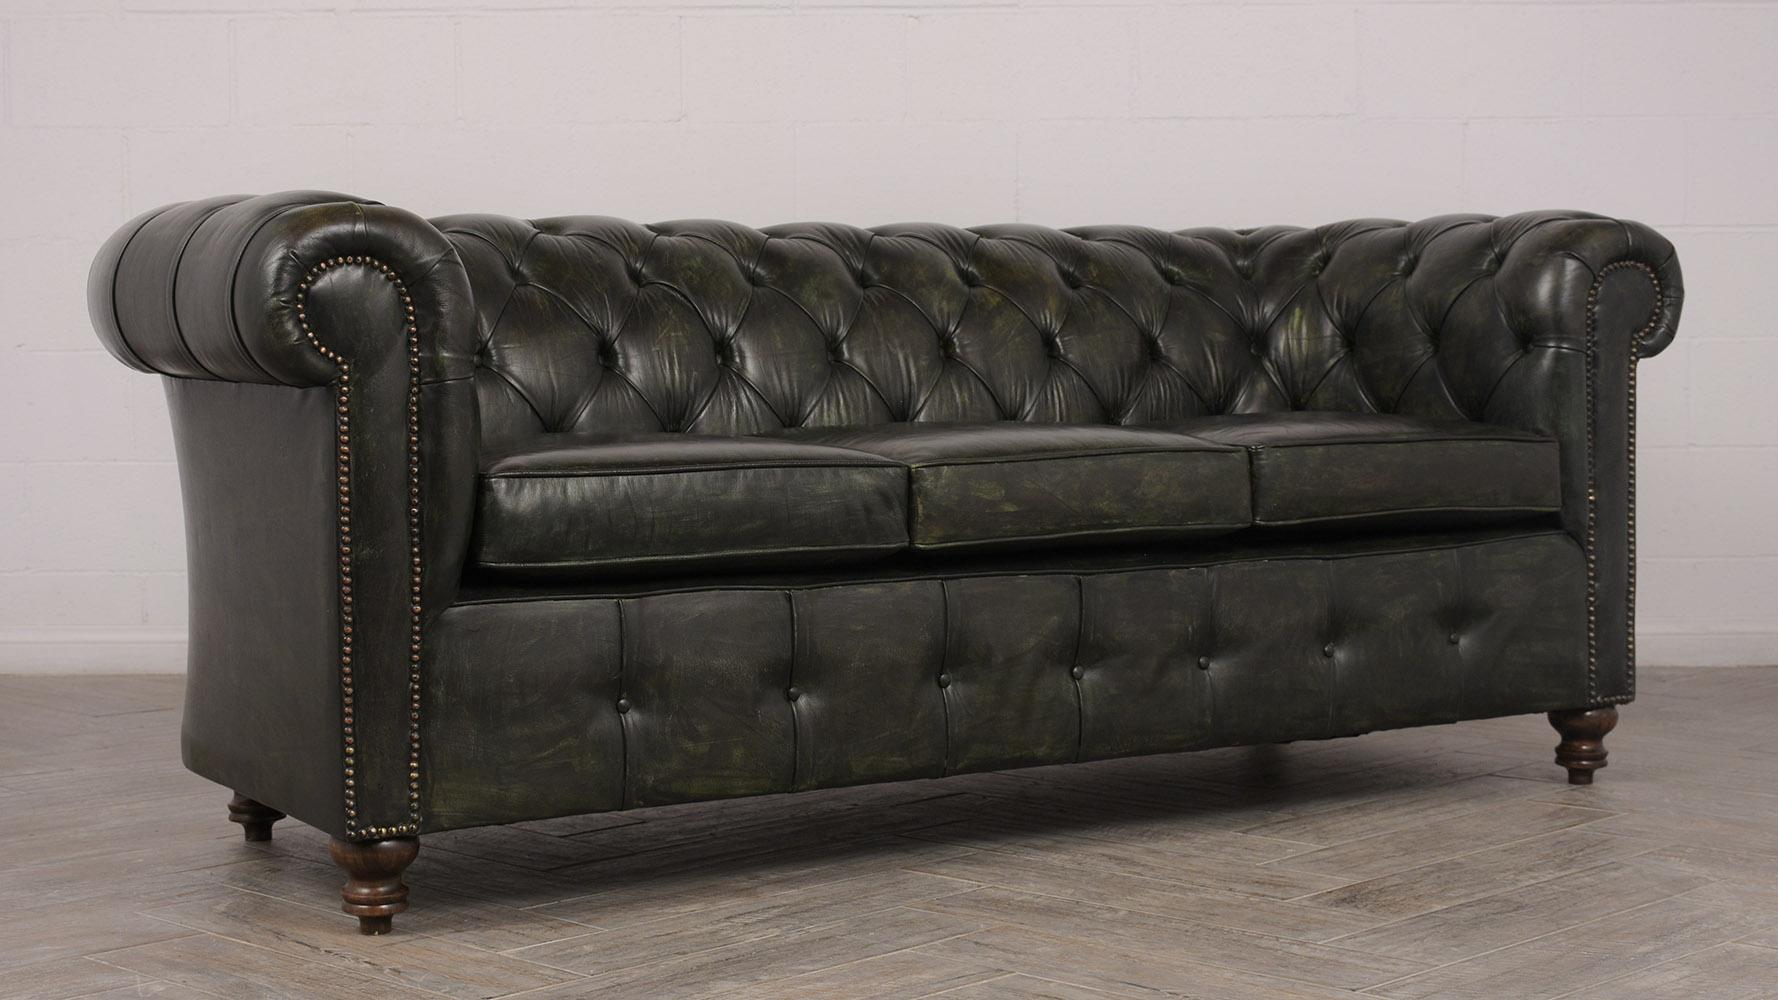 Patinated Chesterfield Tufted Leather Sofa